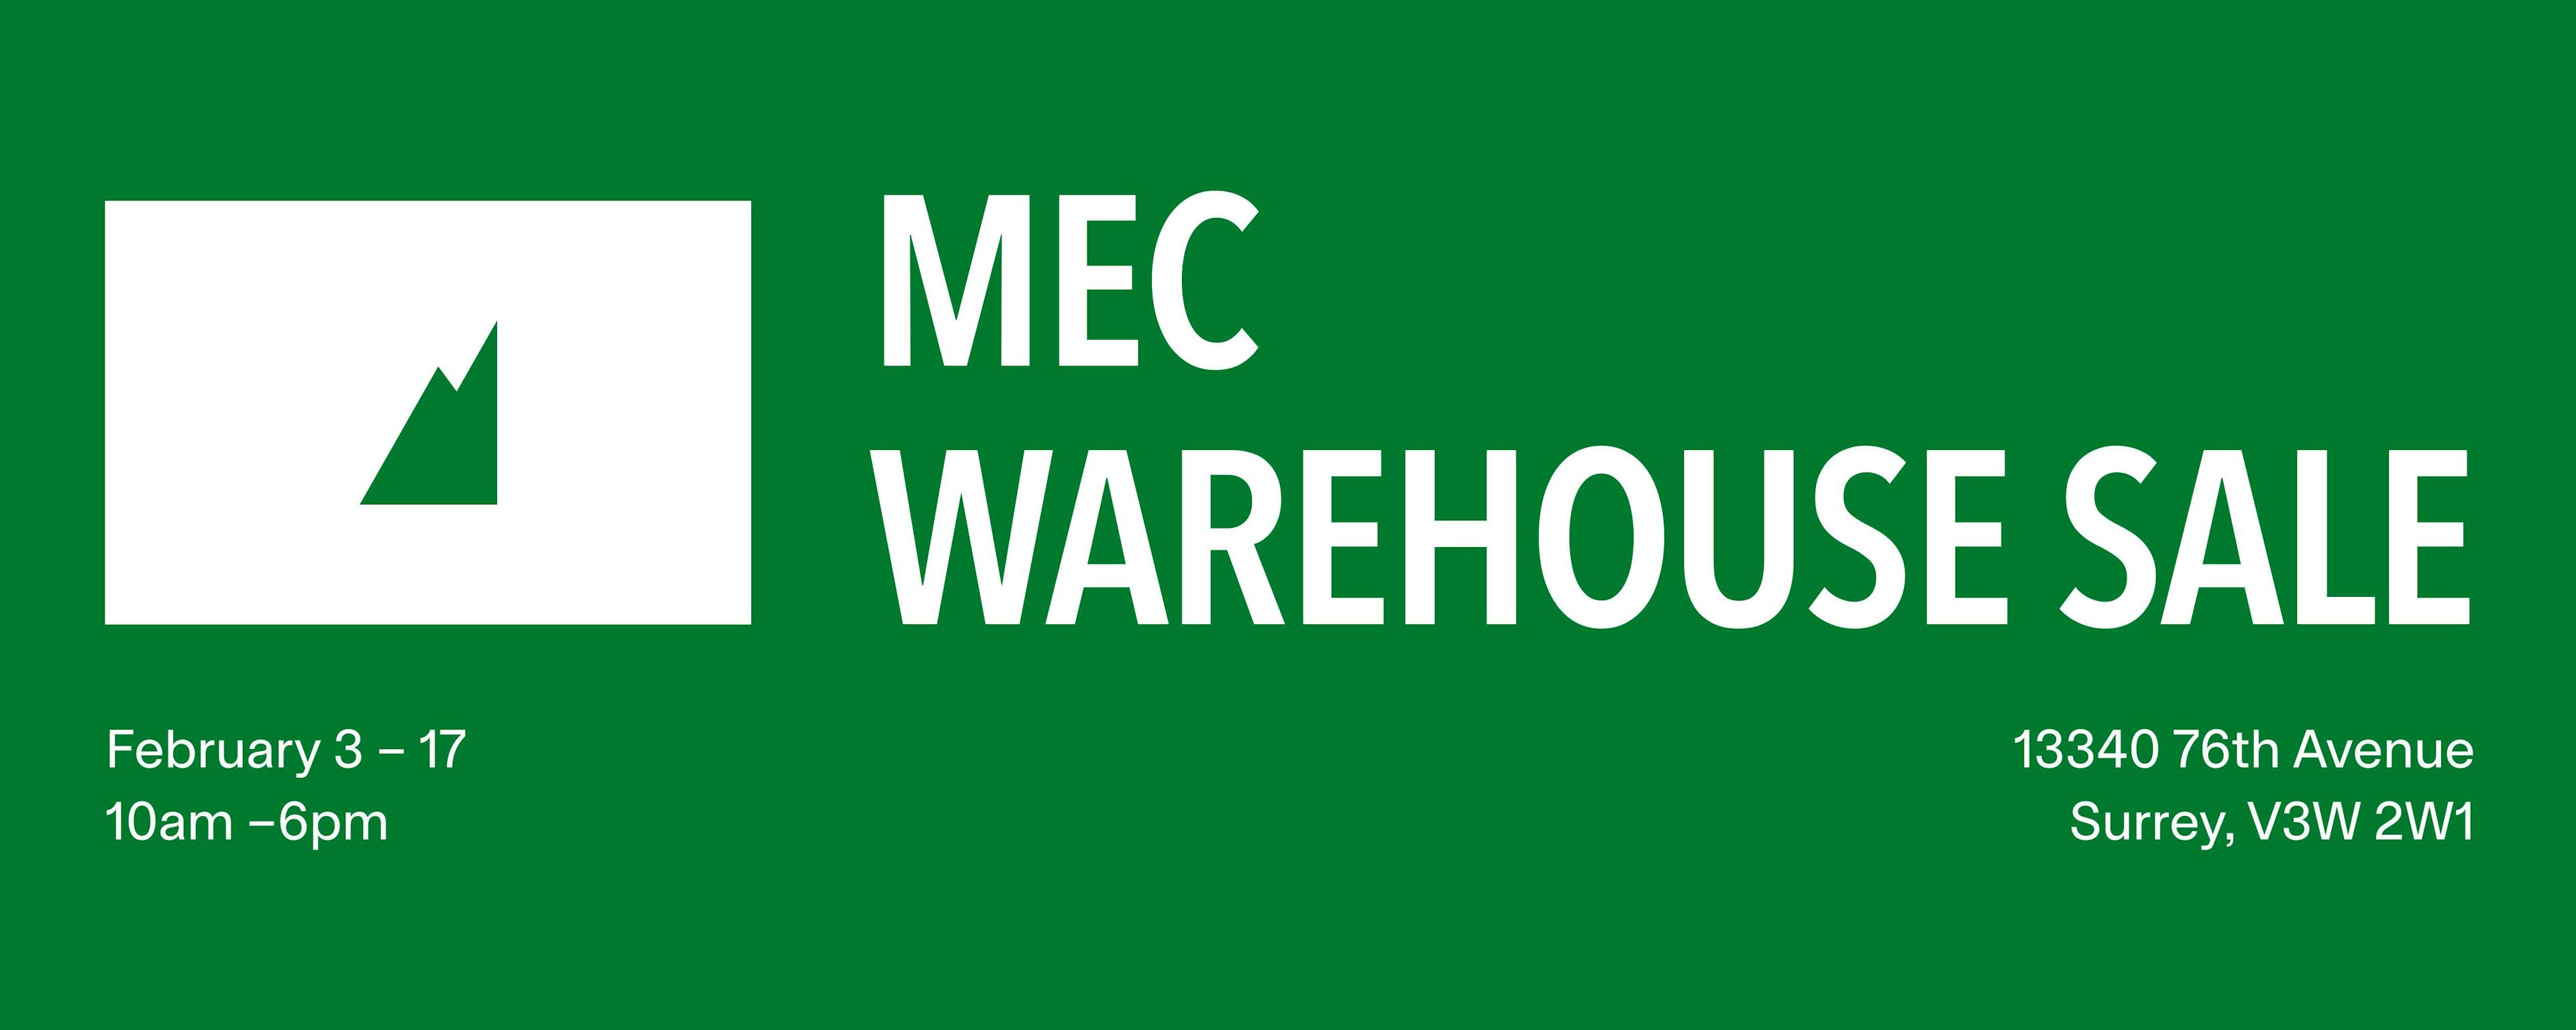 Gear up for adventure at the MEC warehouse sale